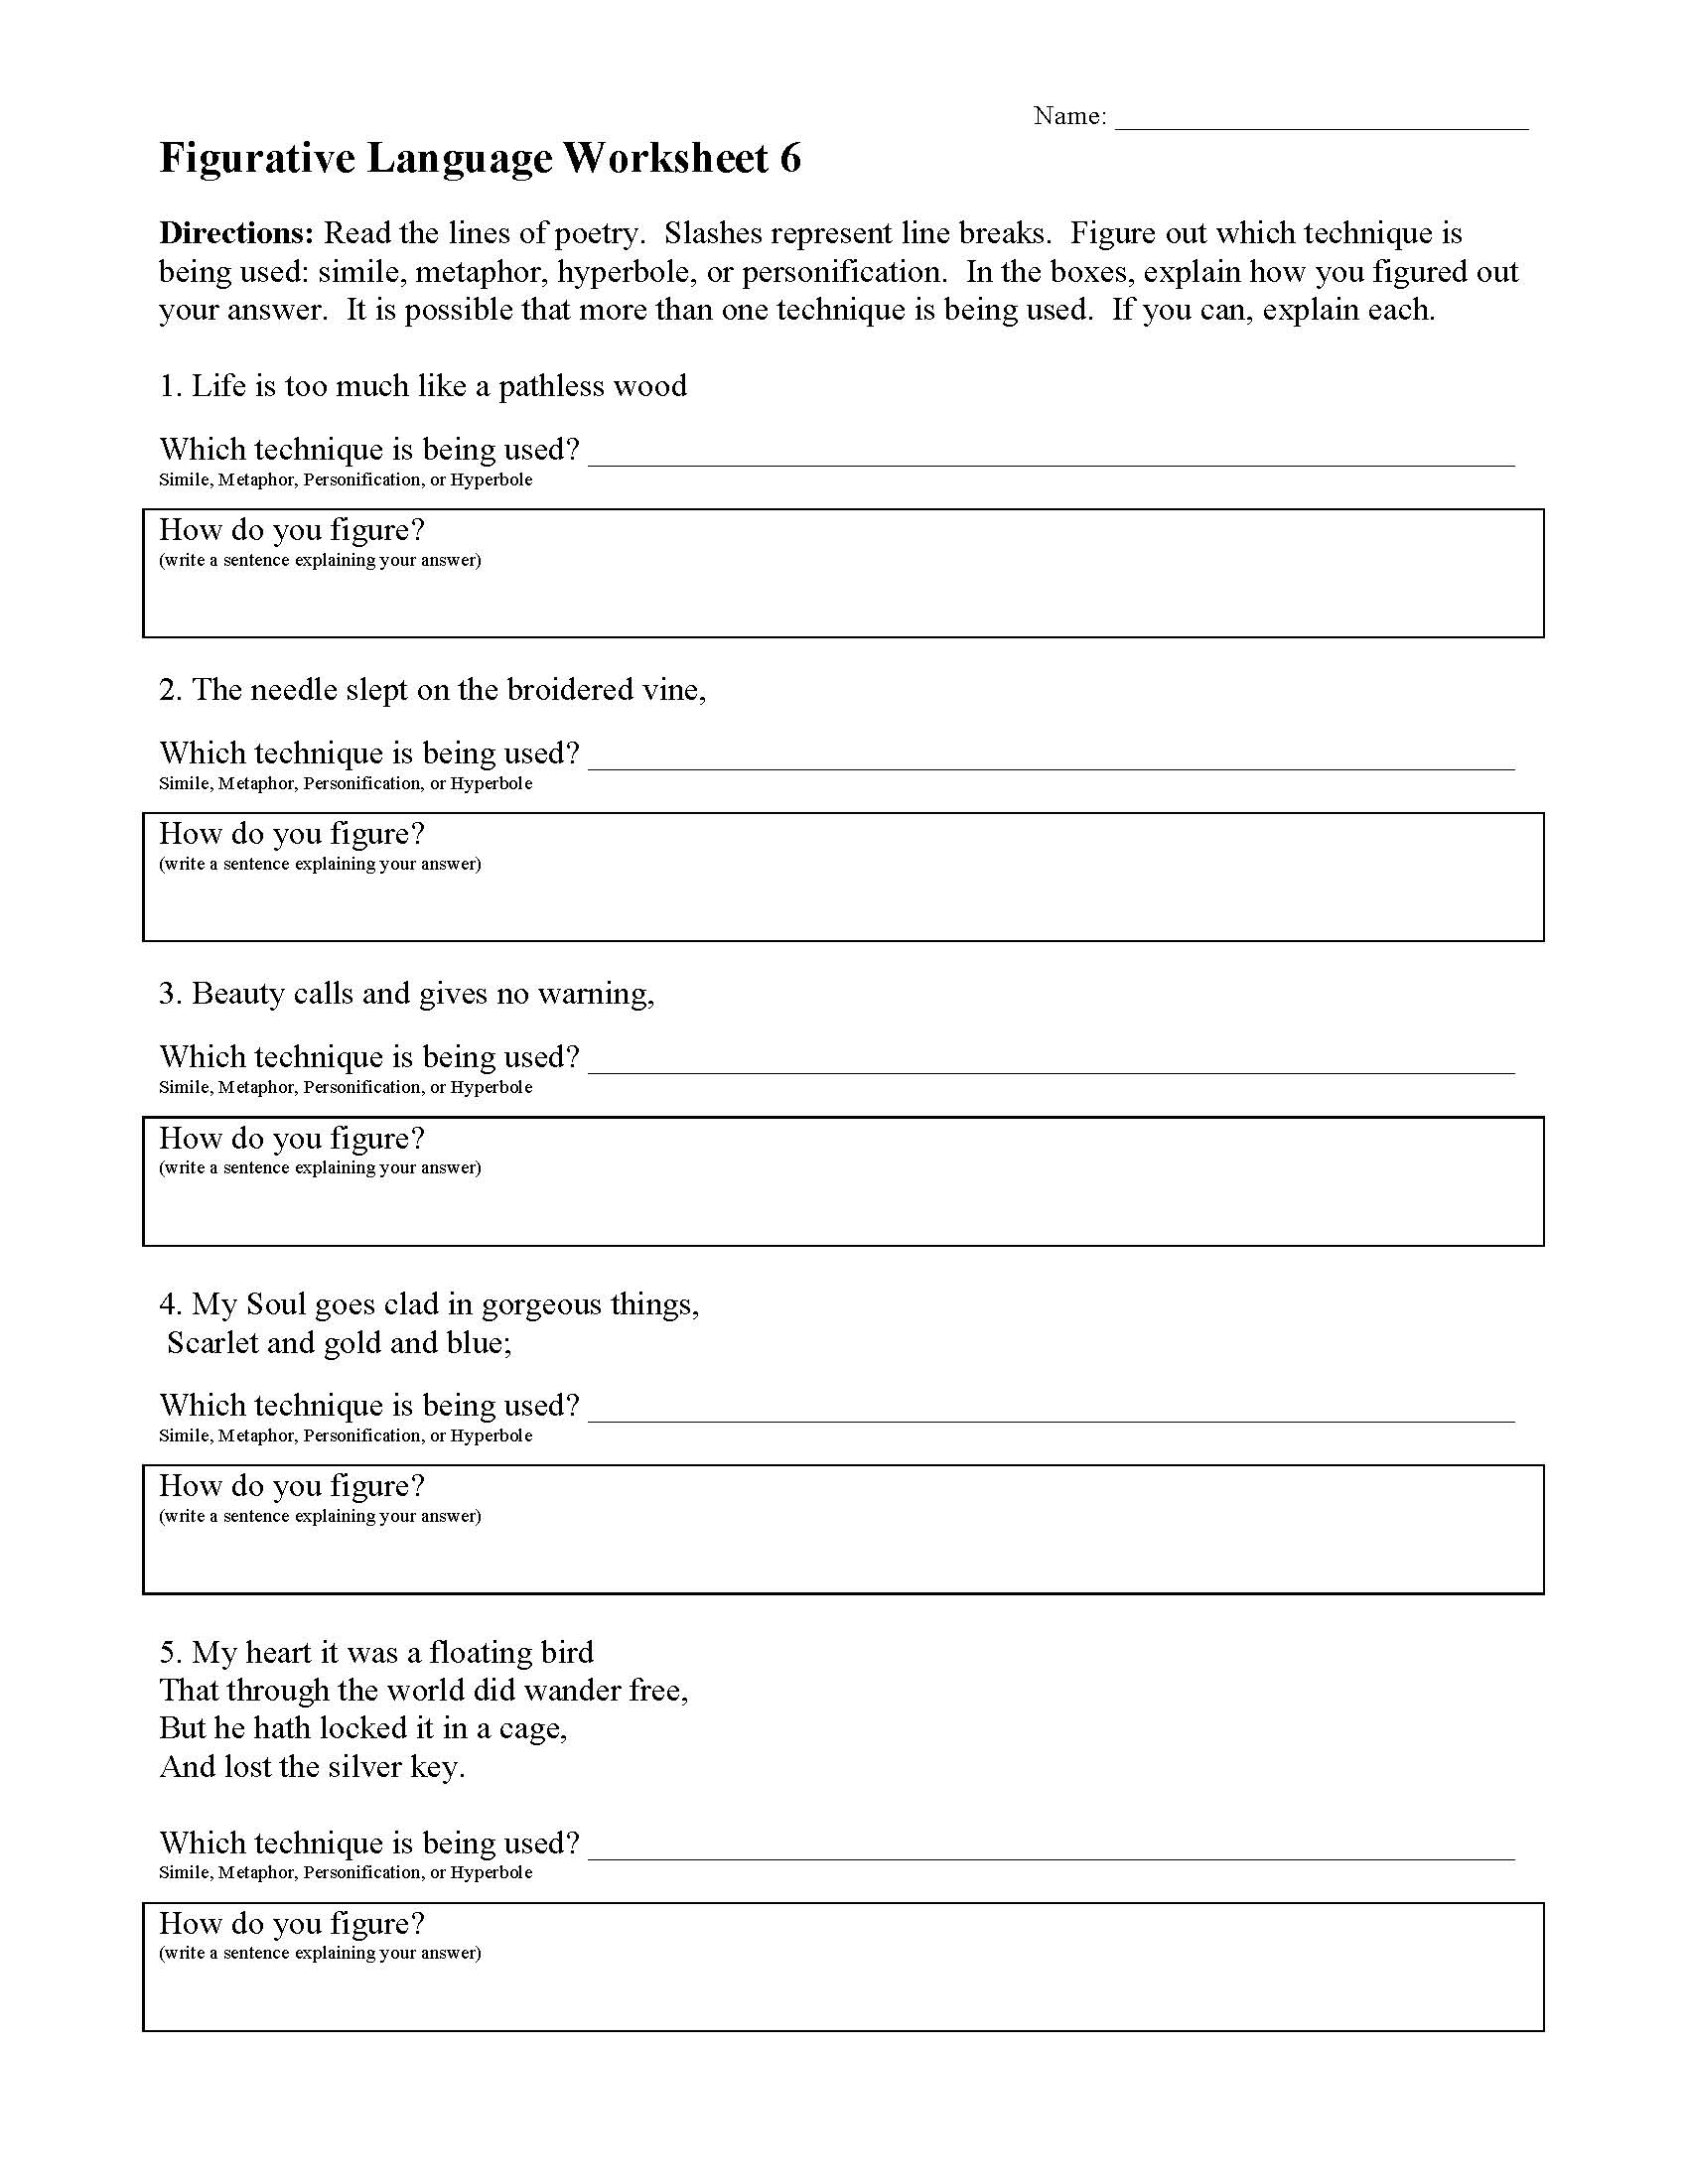 figurative-language-worksheet-with-answers-my-pdf-collection-2021